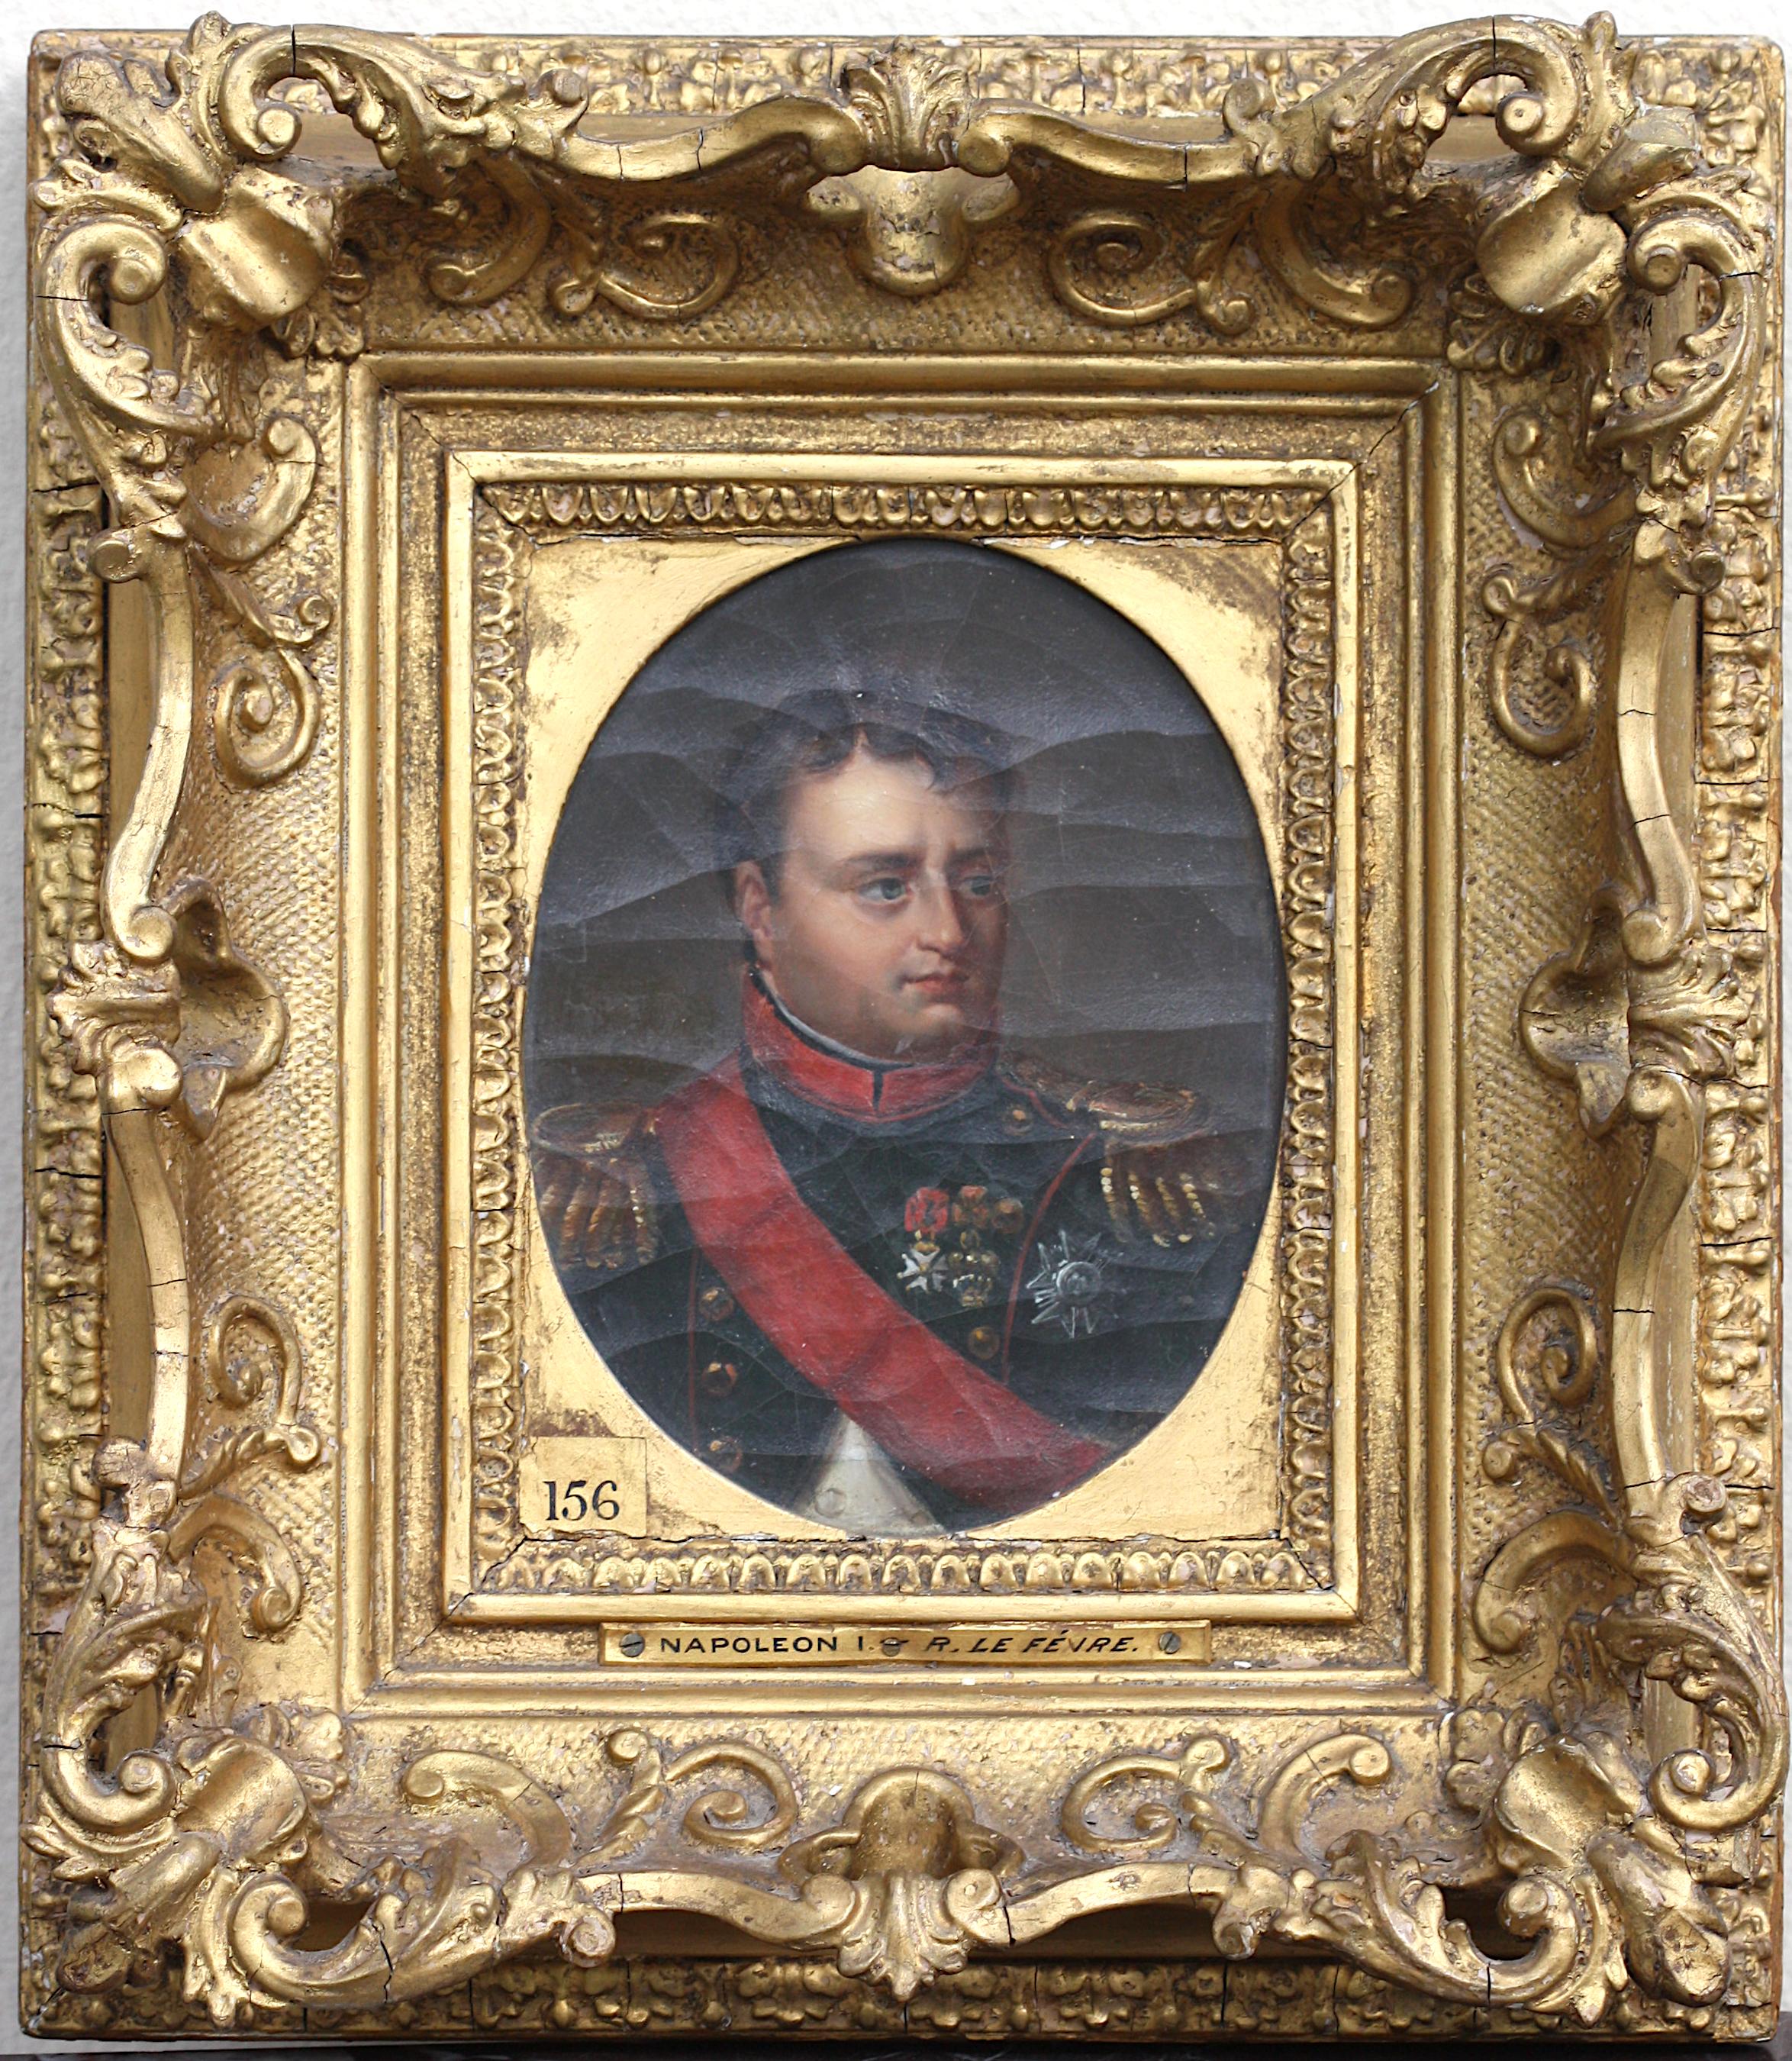 Robert Jacque Francois Faust Lefvere, attributed to
Portrait of Napoleon Bonaparte as Emperor, circa 1810-1820 
signed and dated 1814/19 (?) beneath a layer of varnish,
oil on canvas
Measures: height 6 in., width 5 in. 

cf. Numerous